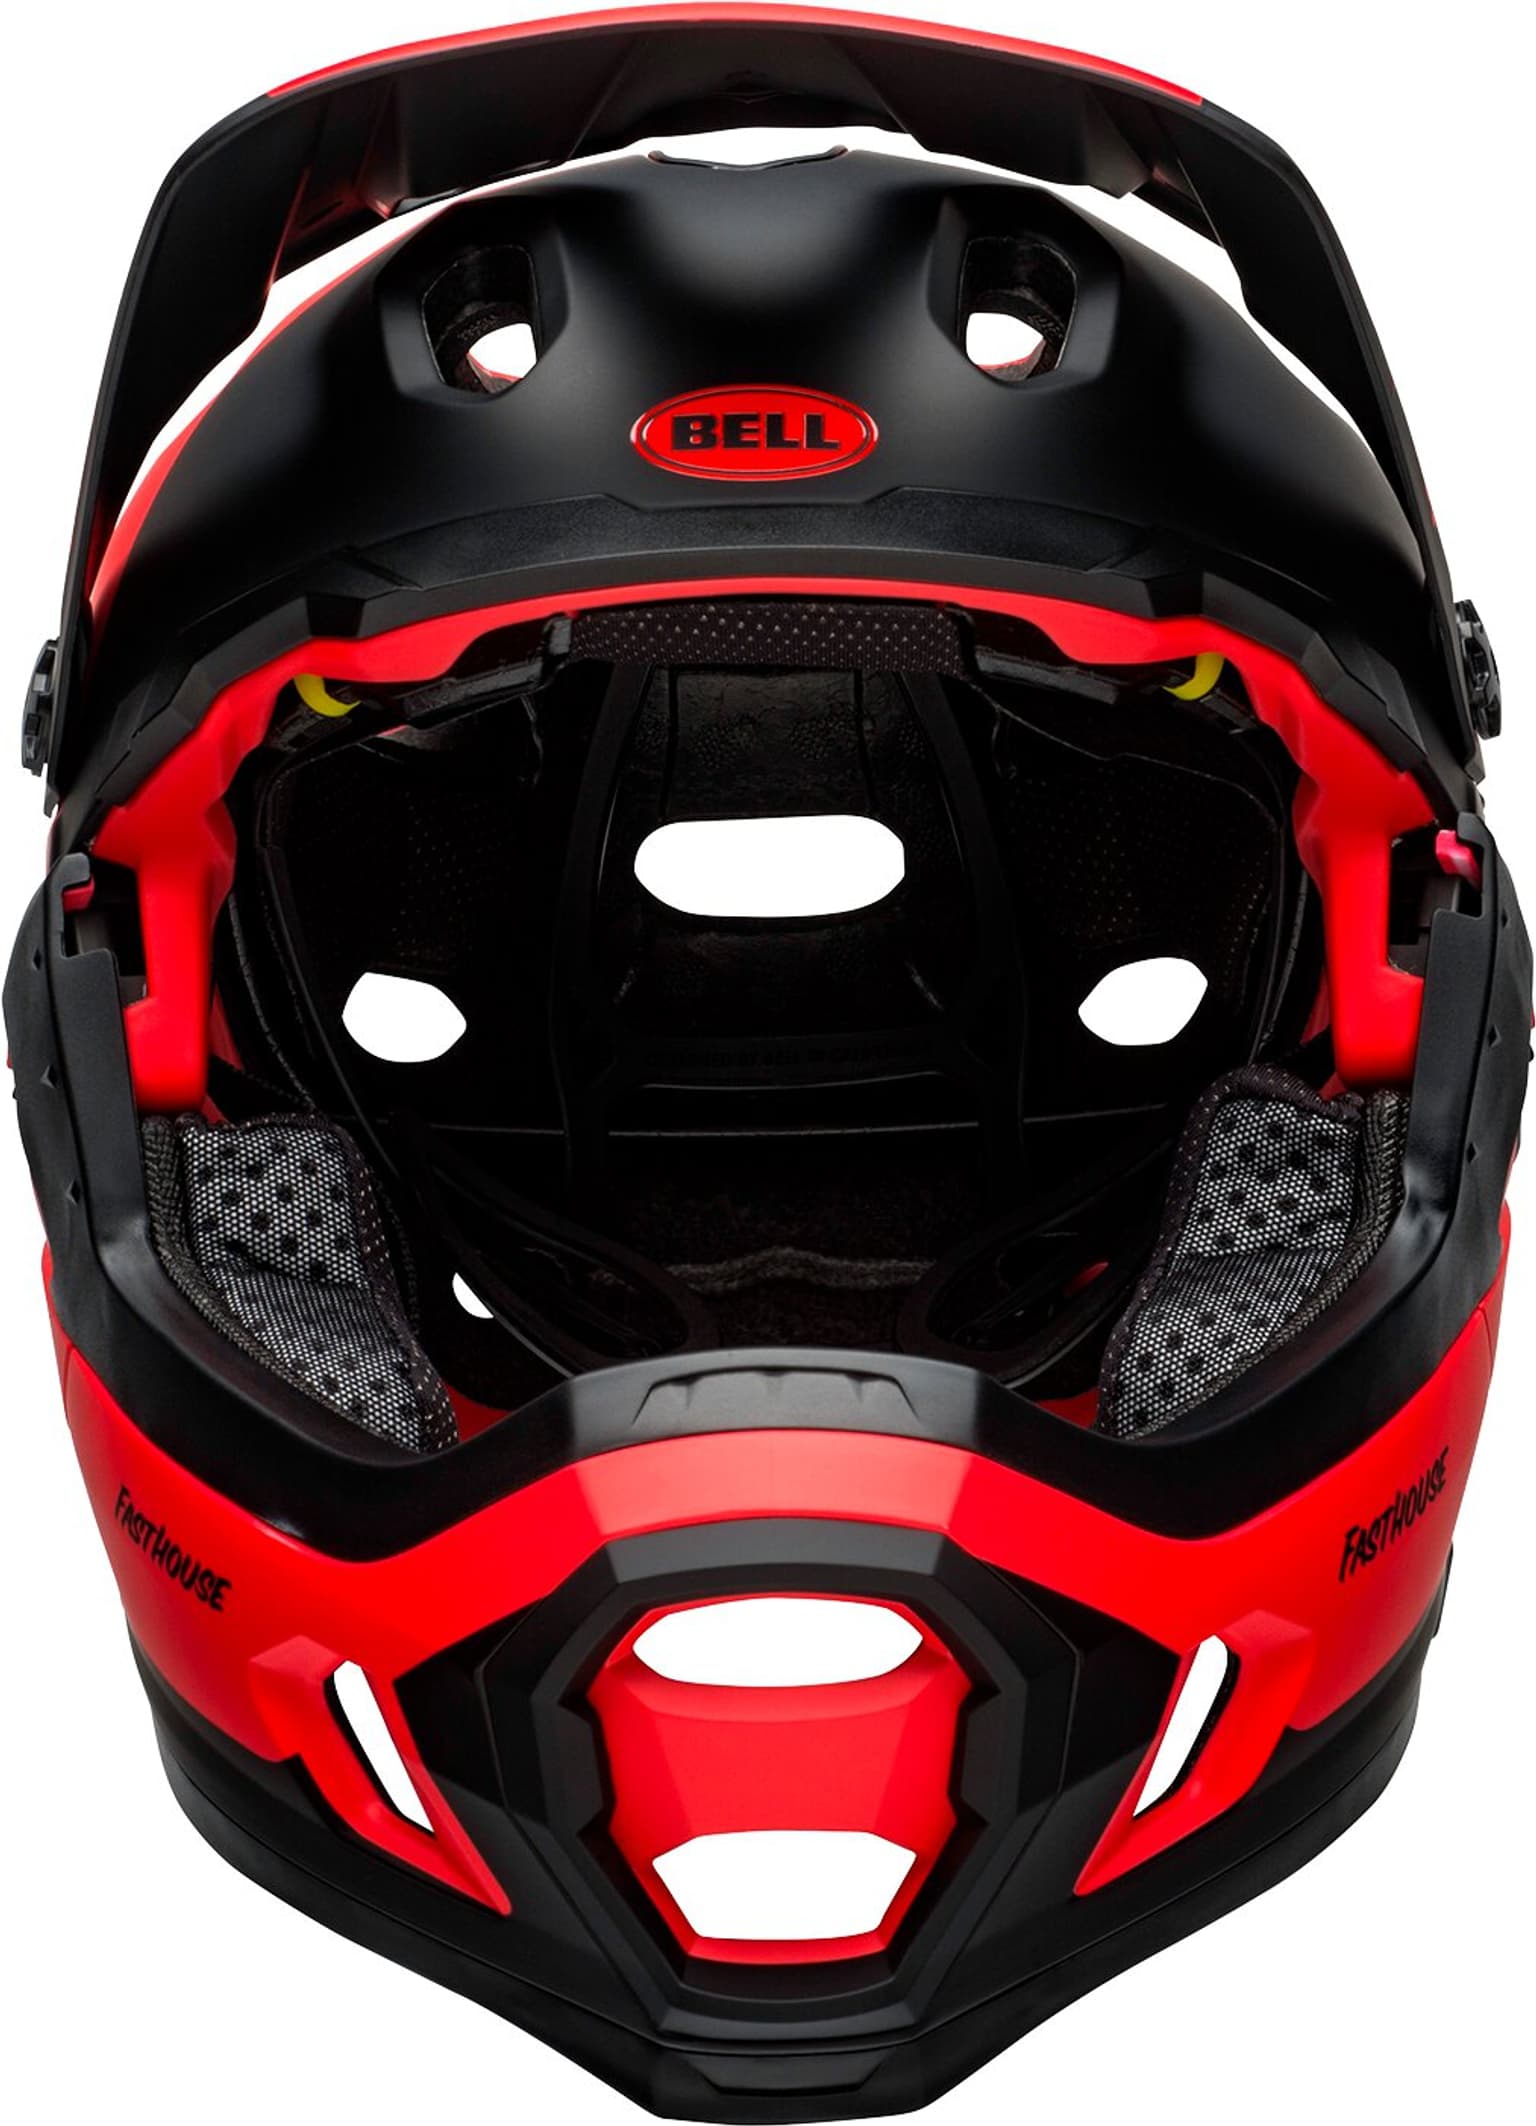 Bell Bell Super DH MIPS Velohelm rosso 4